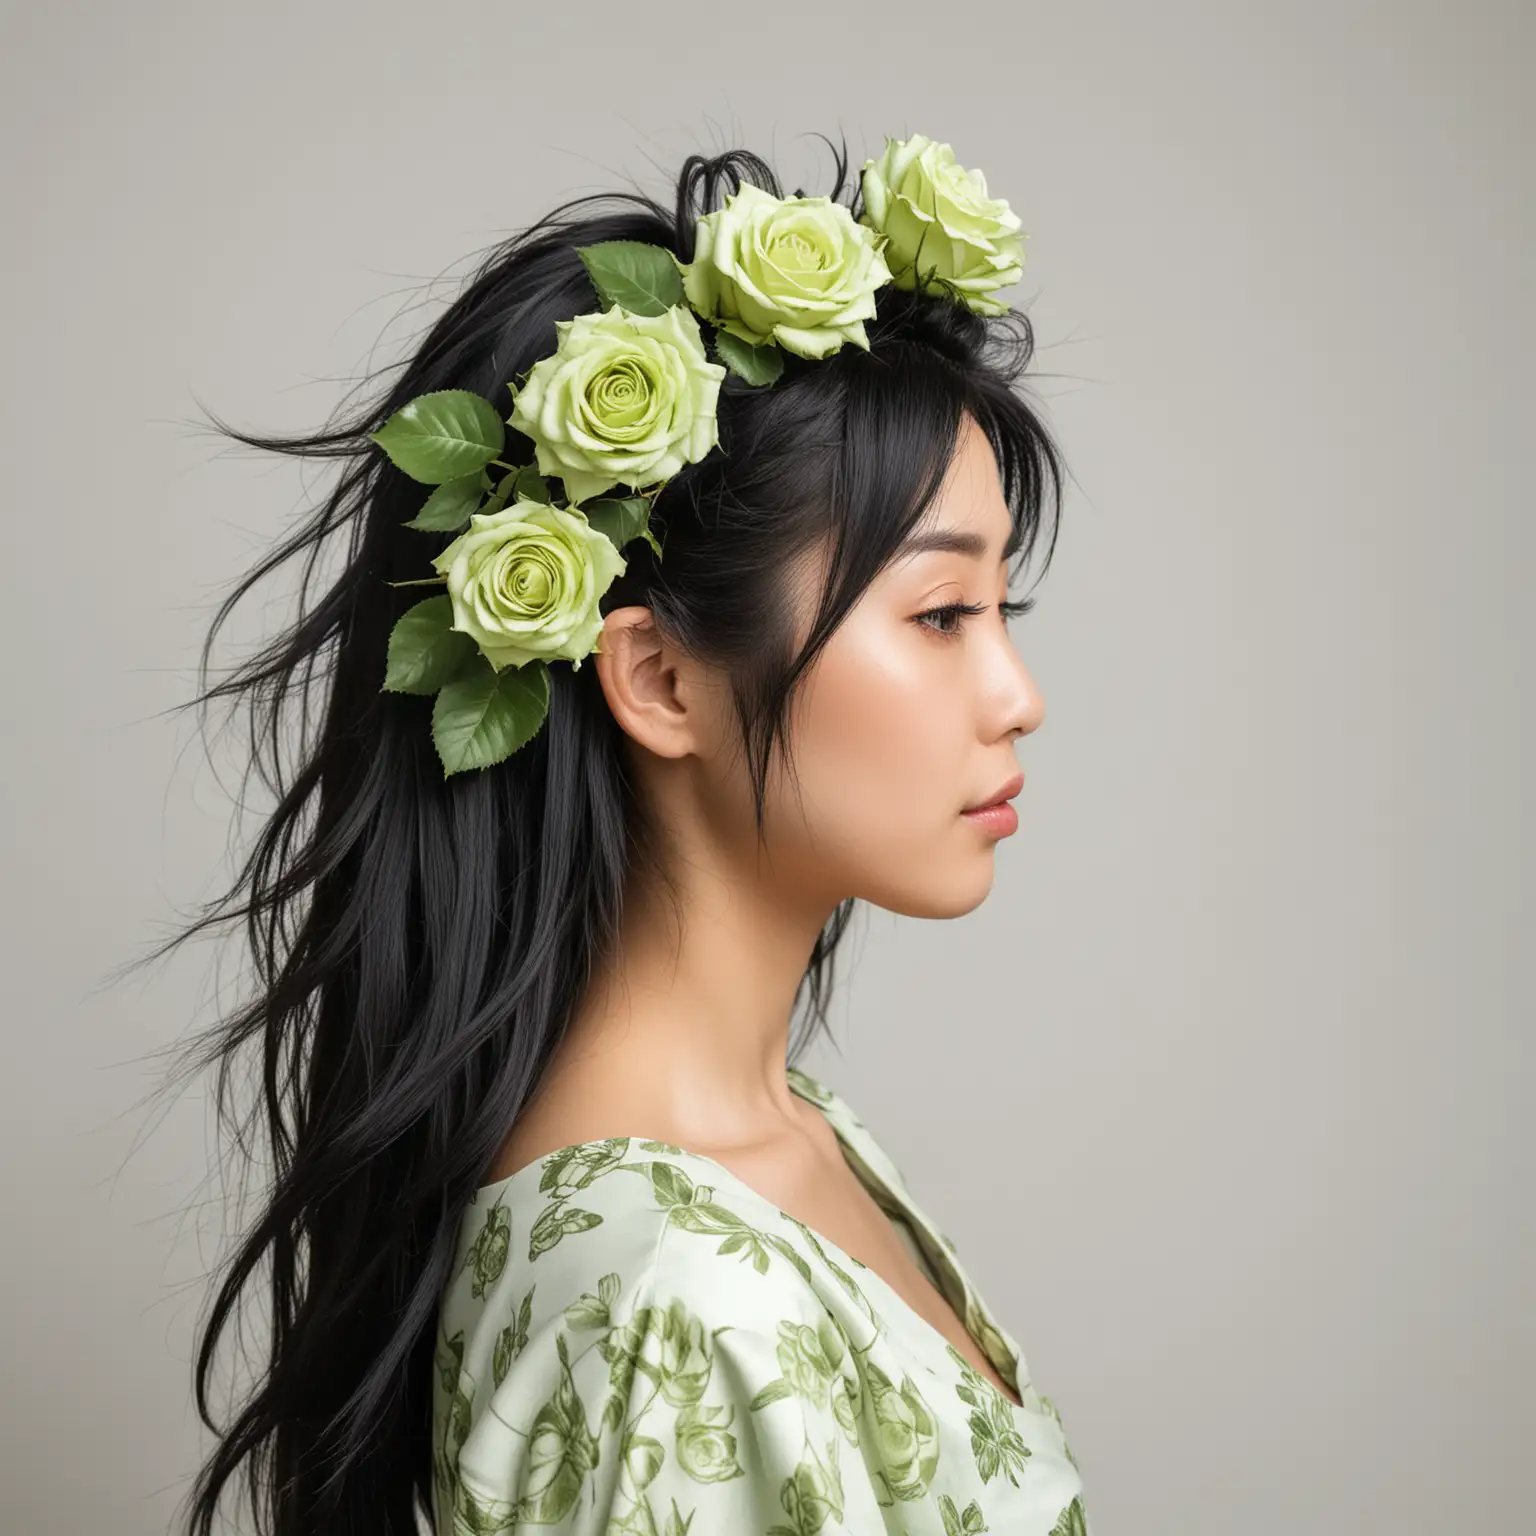 Japanese Woman with Super Saiyan Hair and LimeGreen Roses in Side Profile Portrait